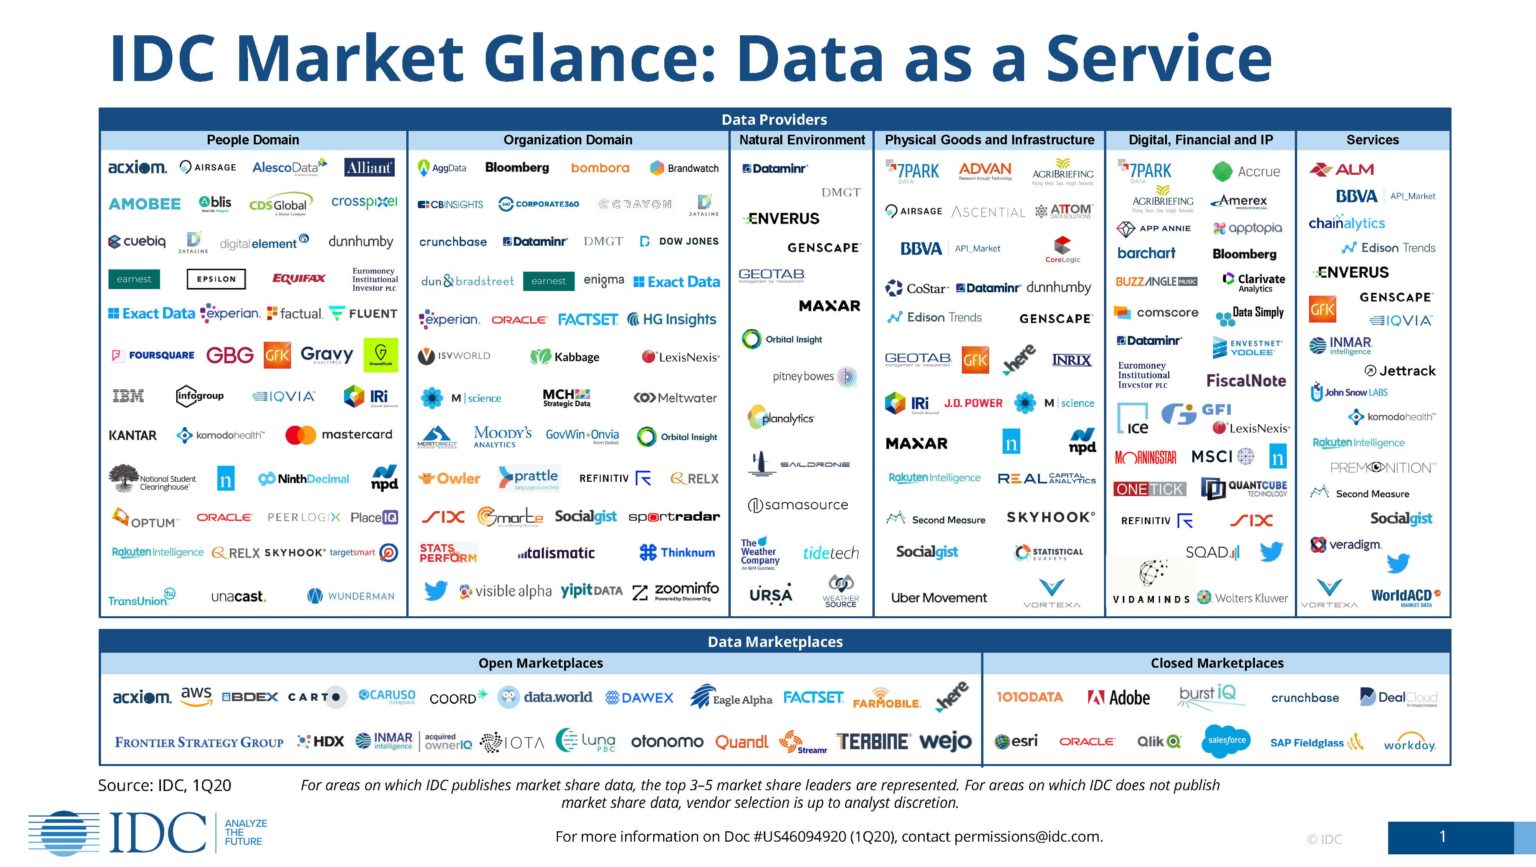 Дата маркетплейс. Data as a service. Space Market at a glance. Data as a service Daas Business models. ISC Market glance Space.